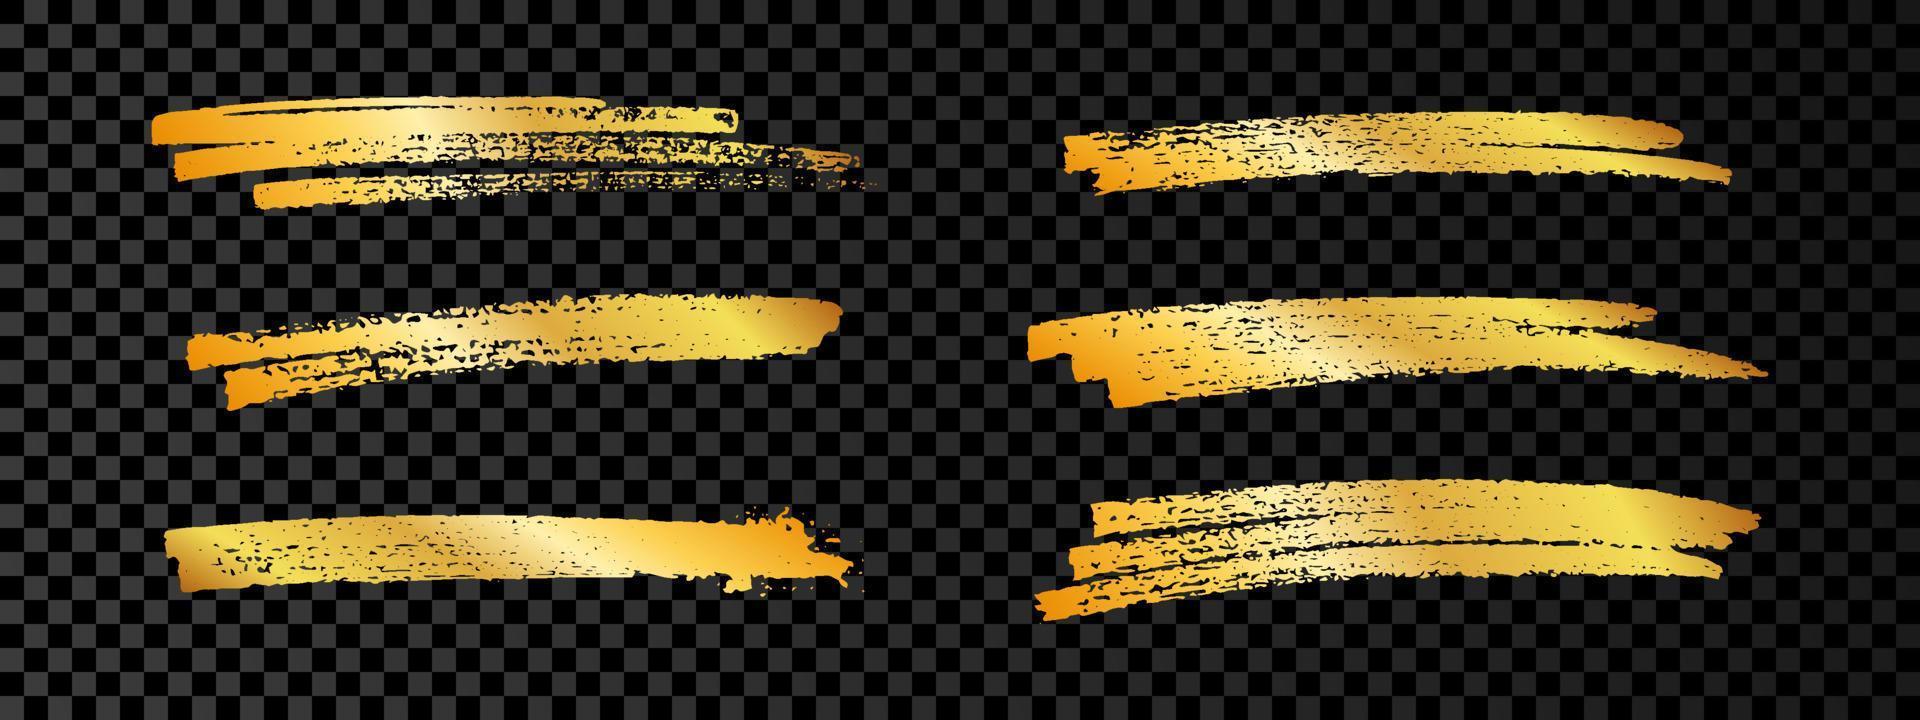 Gold paint brush smear stroke. Set of six abstract gold glittering sketch scribbles smears on dark background. Vector illustration.